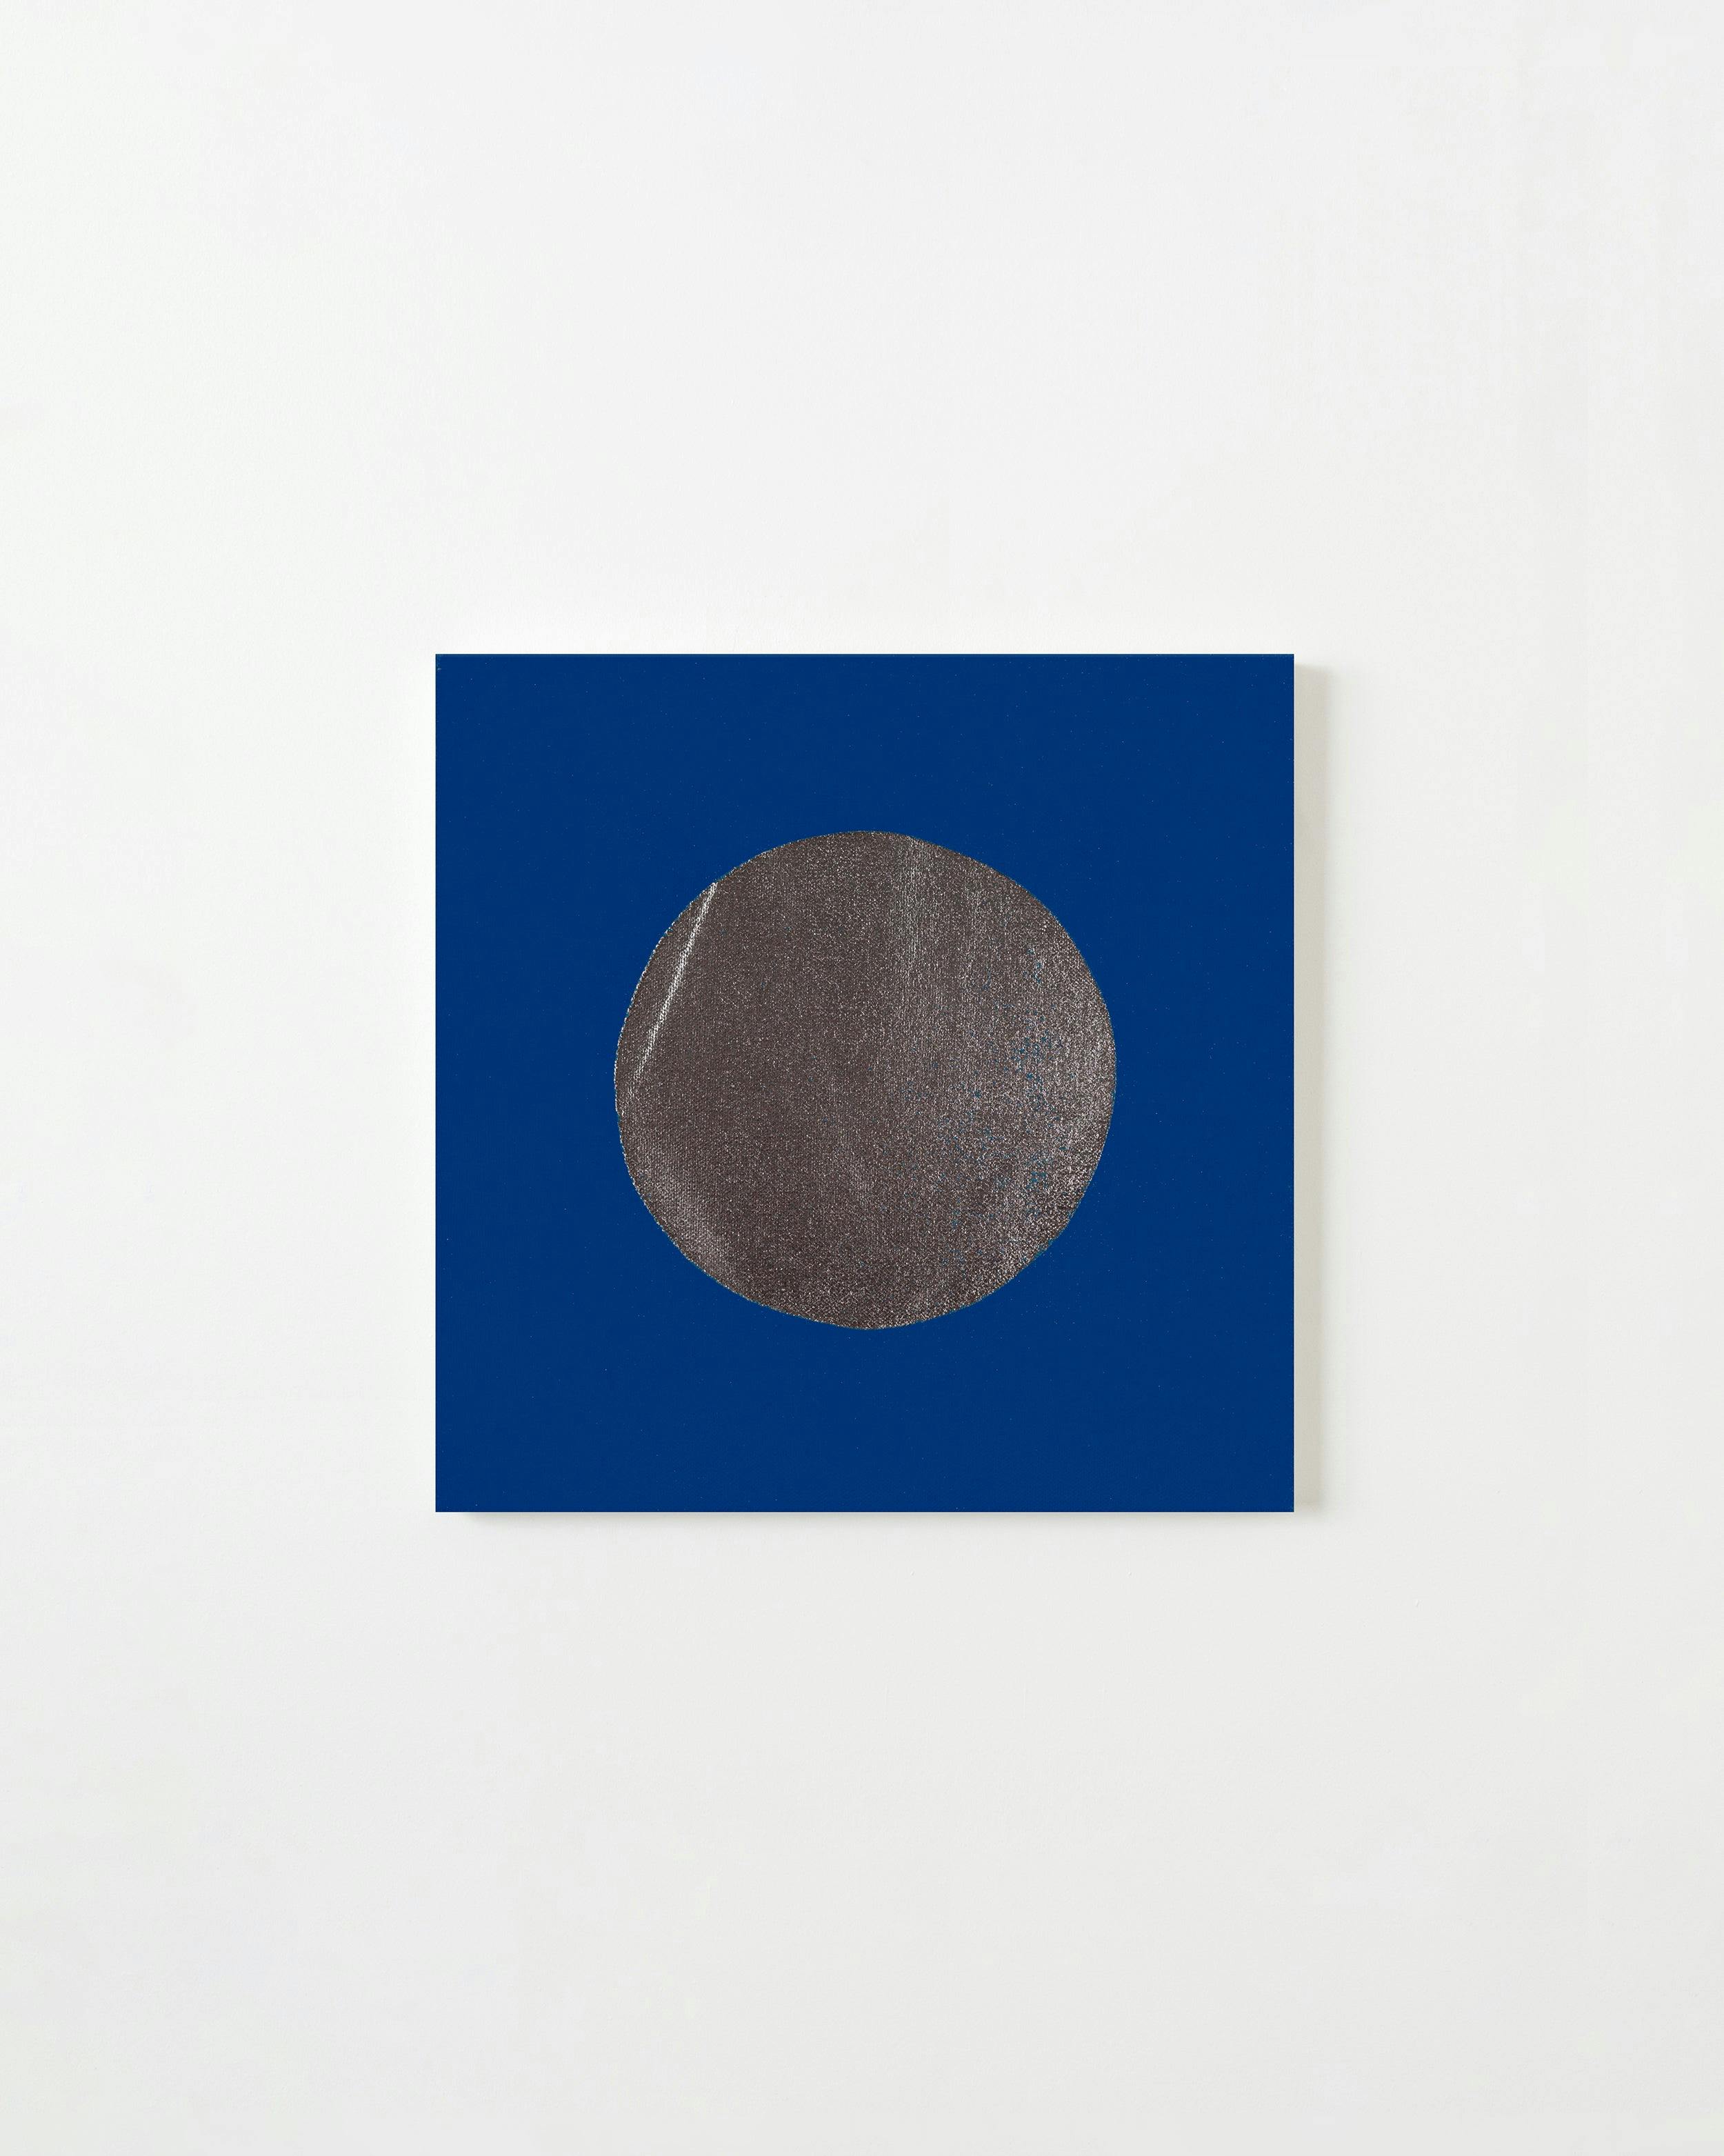 Painting by Chad Kouri titled "Reflection Pool Blue (1x1)".